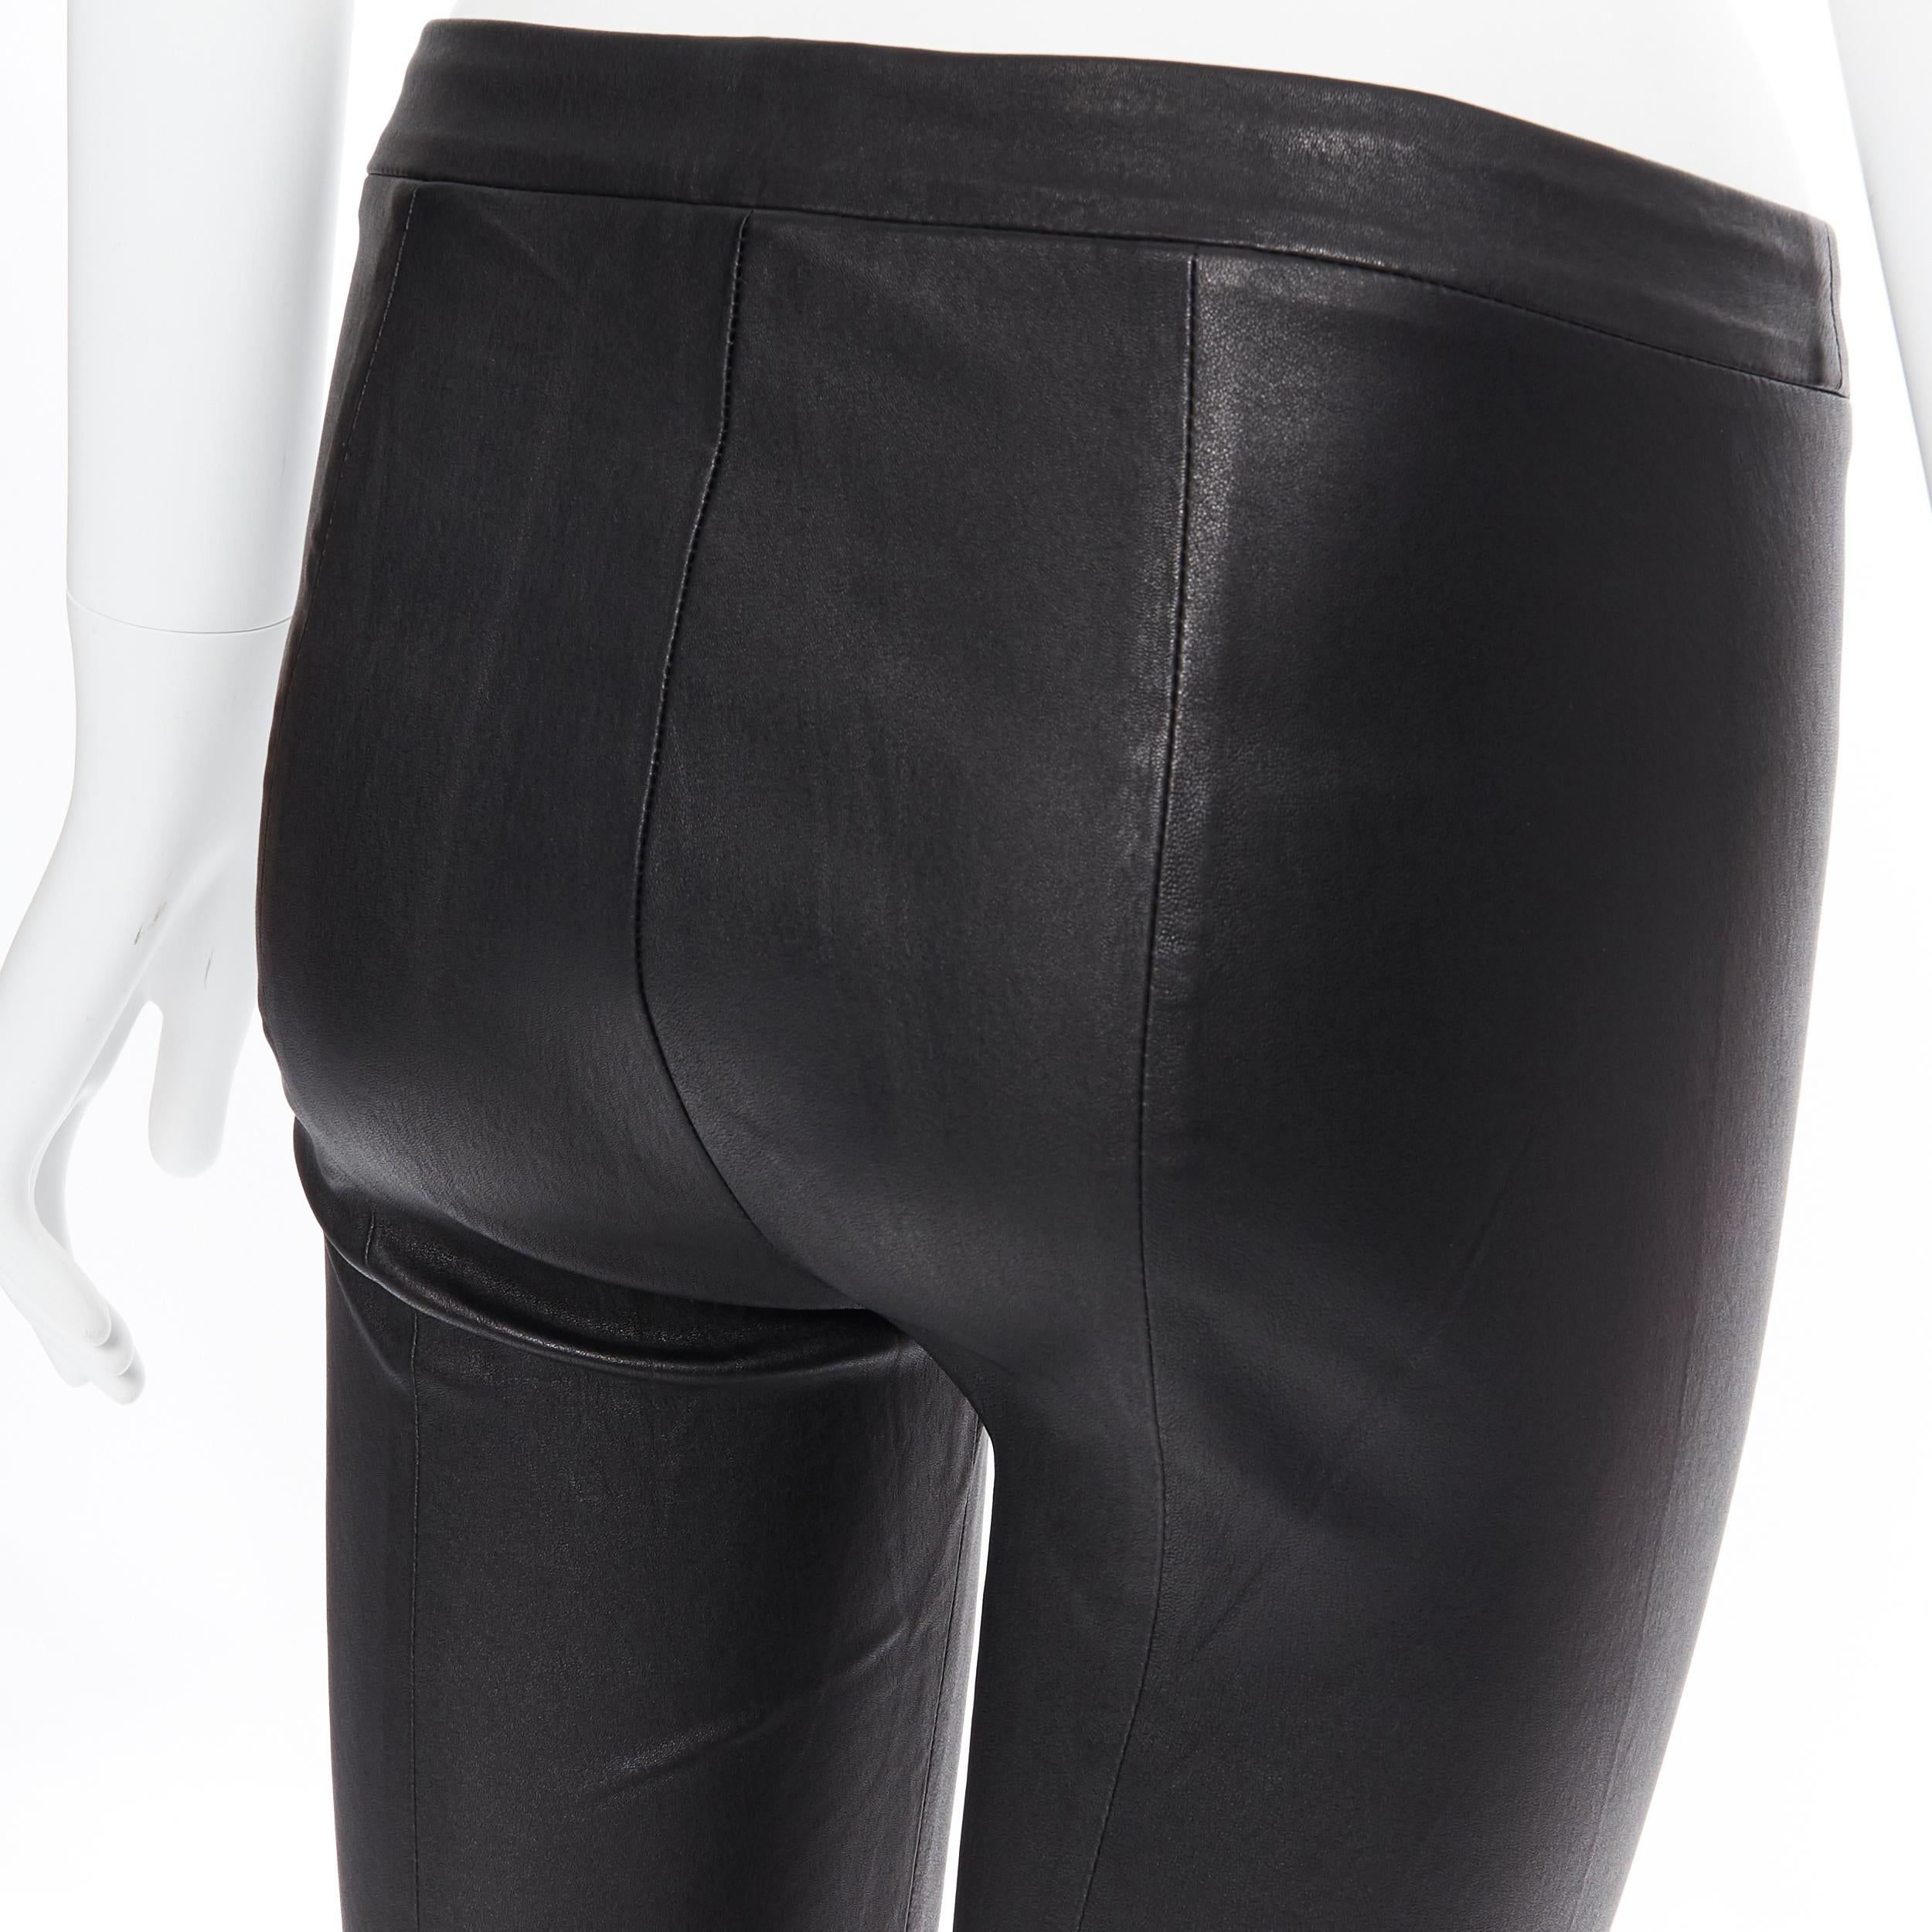 VINCE 100% leather classic black minimal stretchy skinny leg pants XS
Brand: Vince
Model Name / Style: Leather legging
Material: Leather
Color: Black
Pattern: Solid
Extra Detail: Minimalist stretch leather leggings. Mid rise. Skinny leg.
Made in: